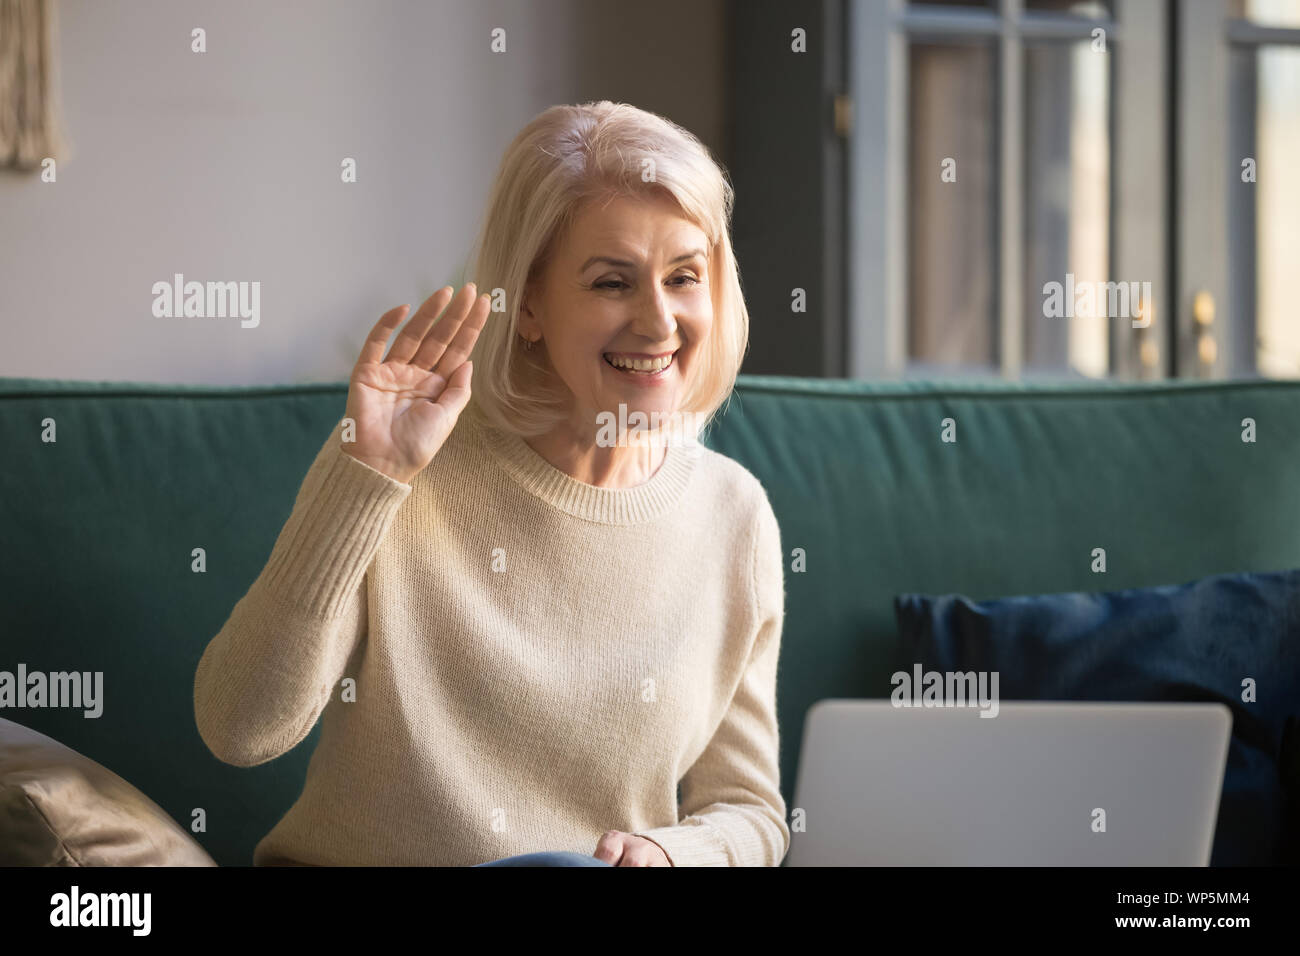 Smiling mature woman talk on video call on laptop Stock Photo